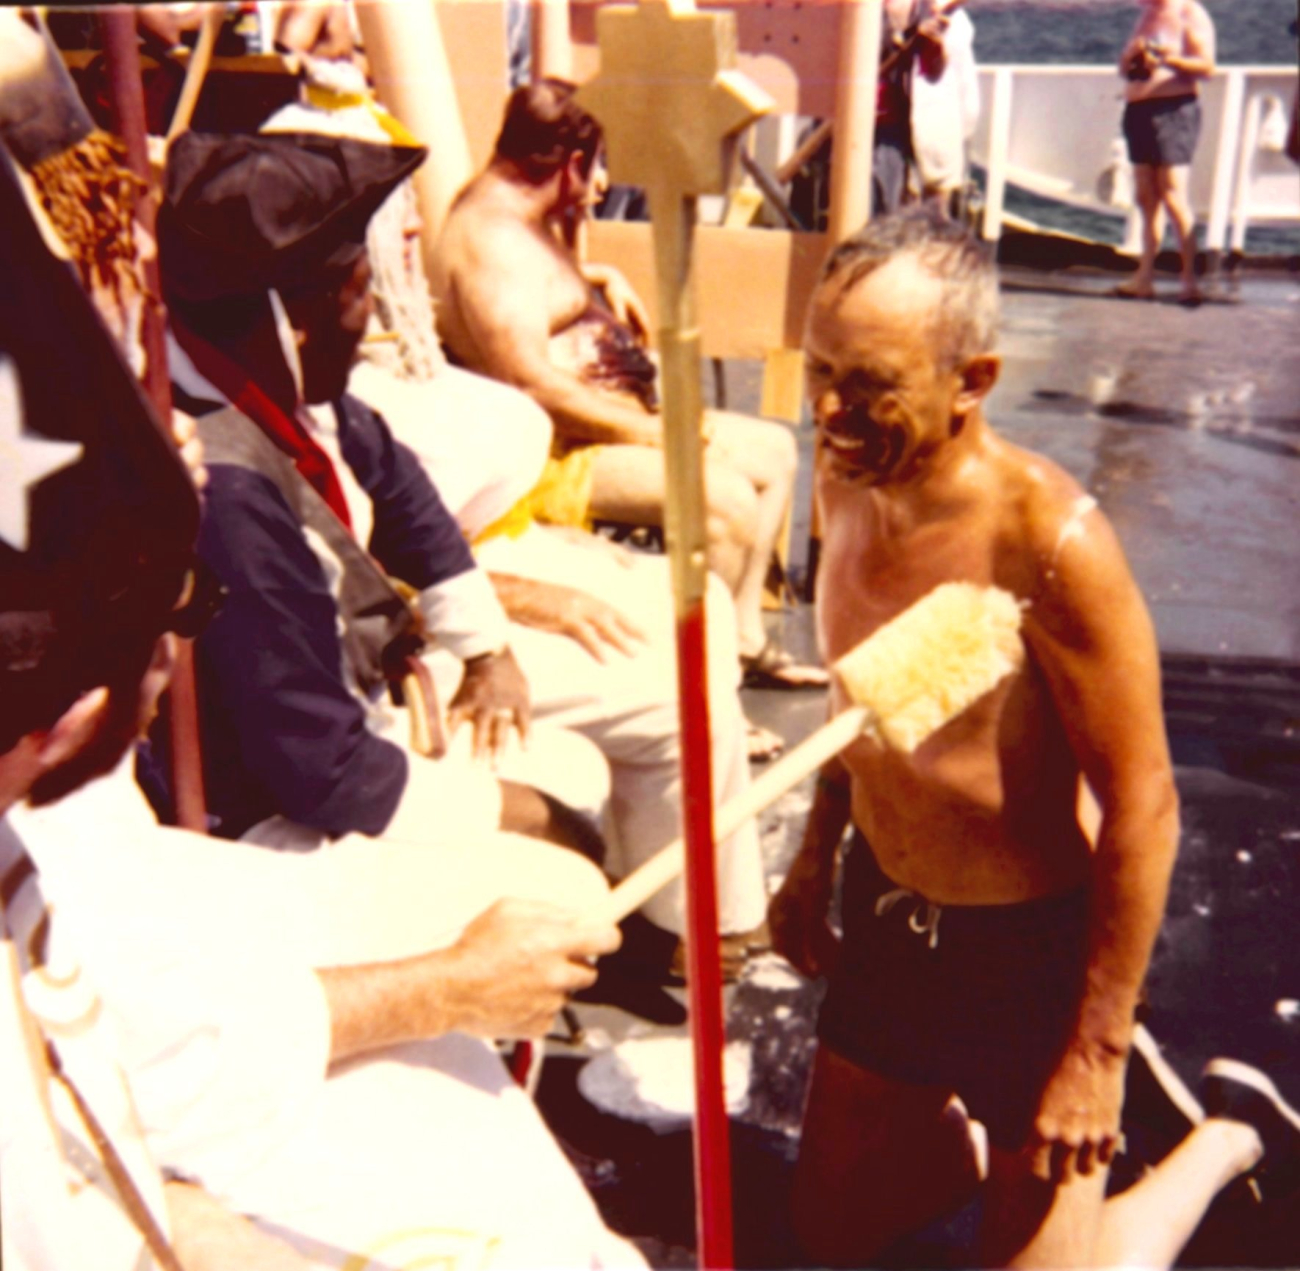 Monte Poindexter receiving being dubbed by the royal sceptre during Equatorcrossing ceremonies on the ESSA Ship DISCOVERER